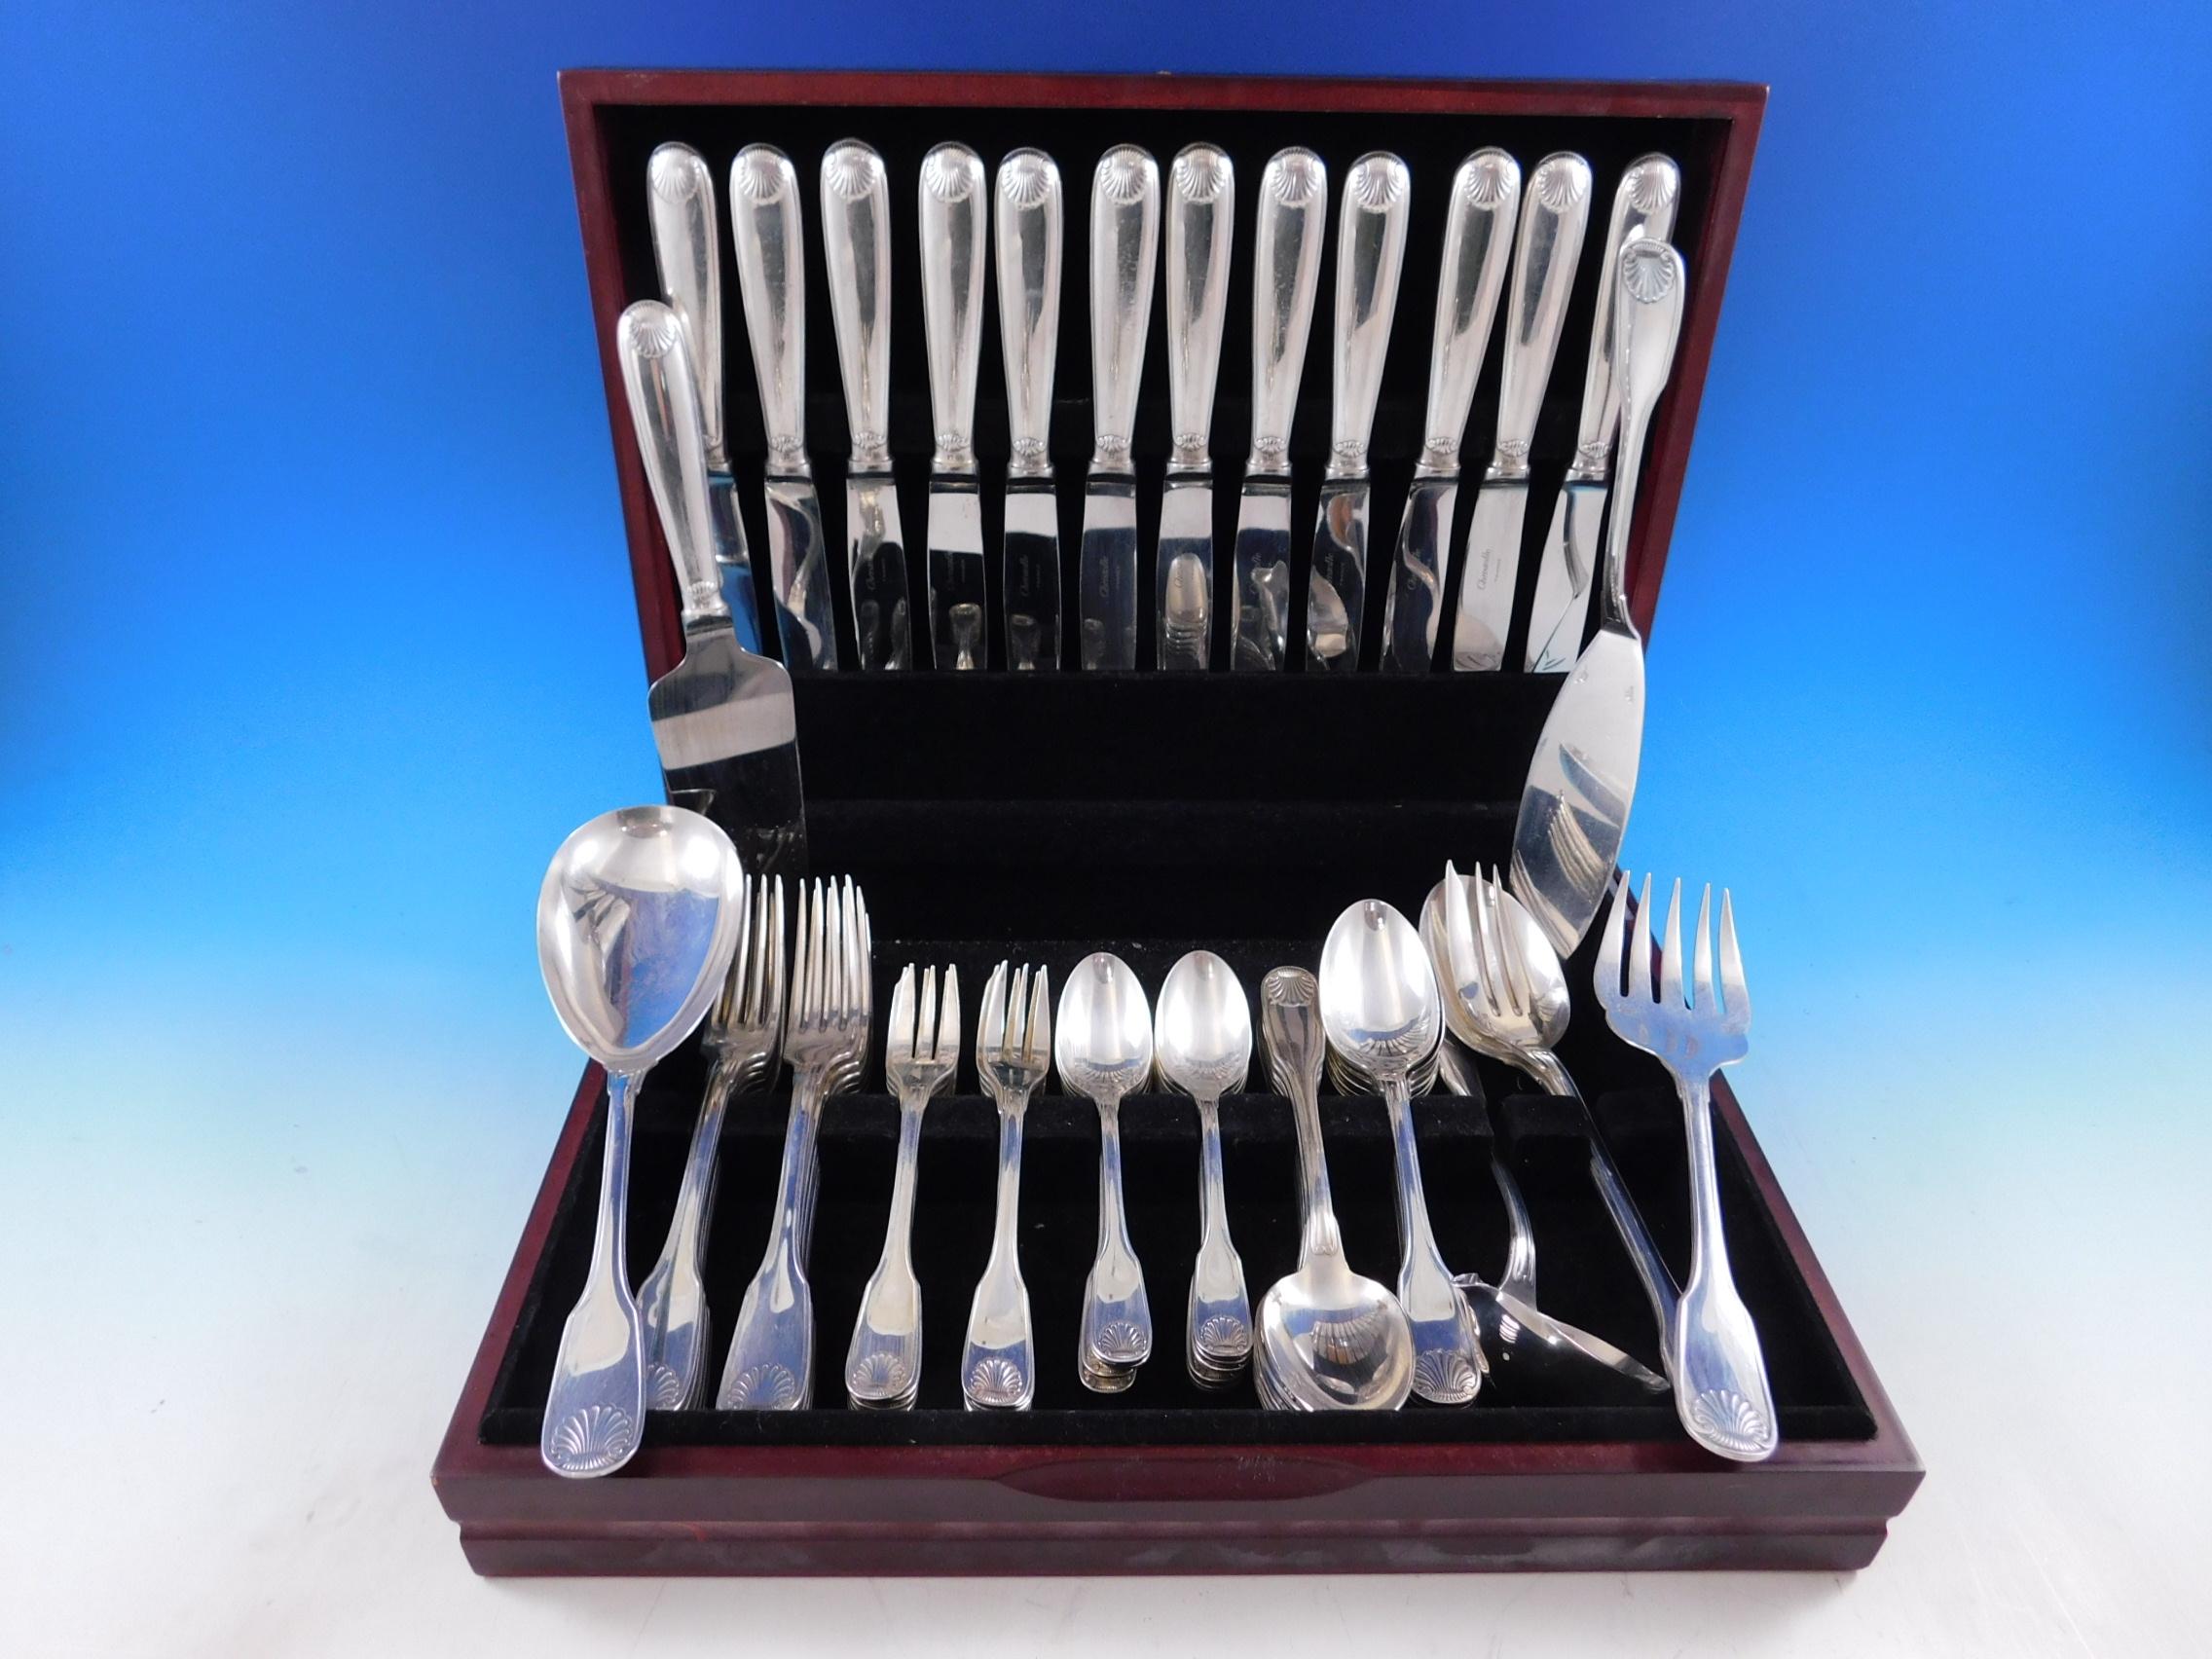 Outstanding dinner size Vendome Arcantia by Christofle France silver plated flatware set, 67 pieces. This pattern features the same shell motif that adorned the ceremonial silverware used during the reign of King Louis XIV. This set includes:

12